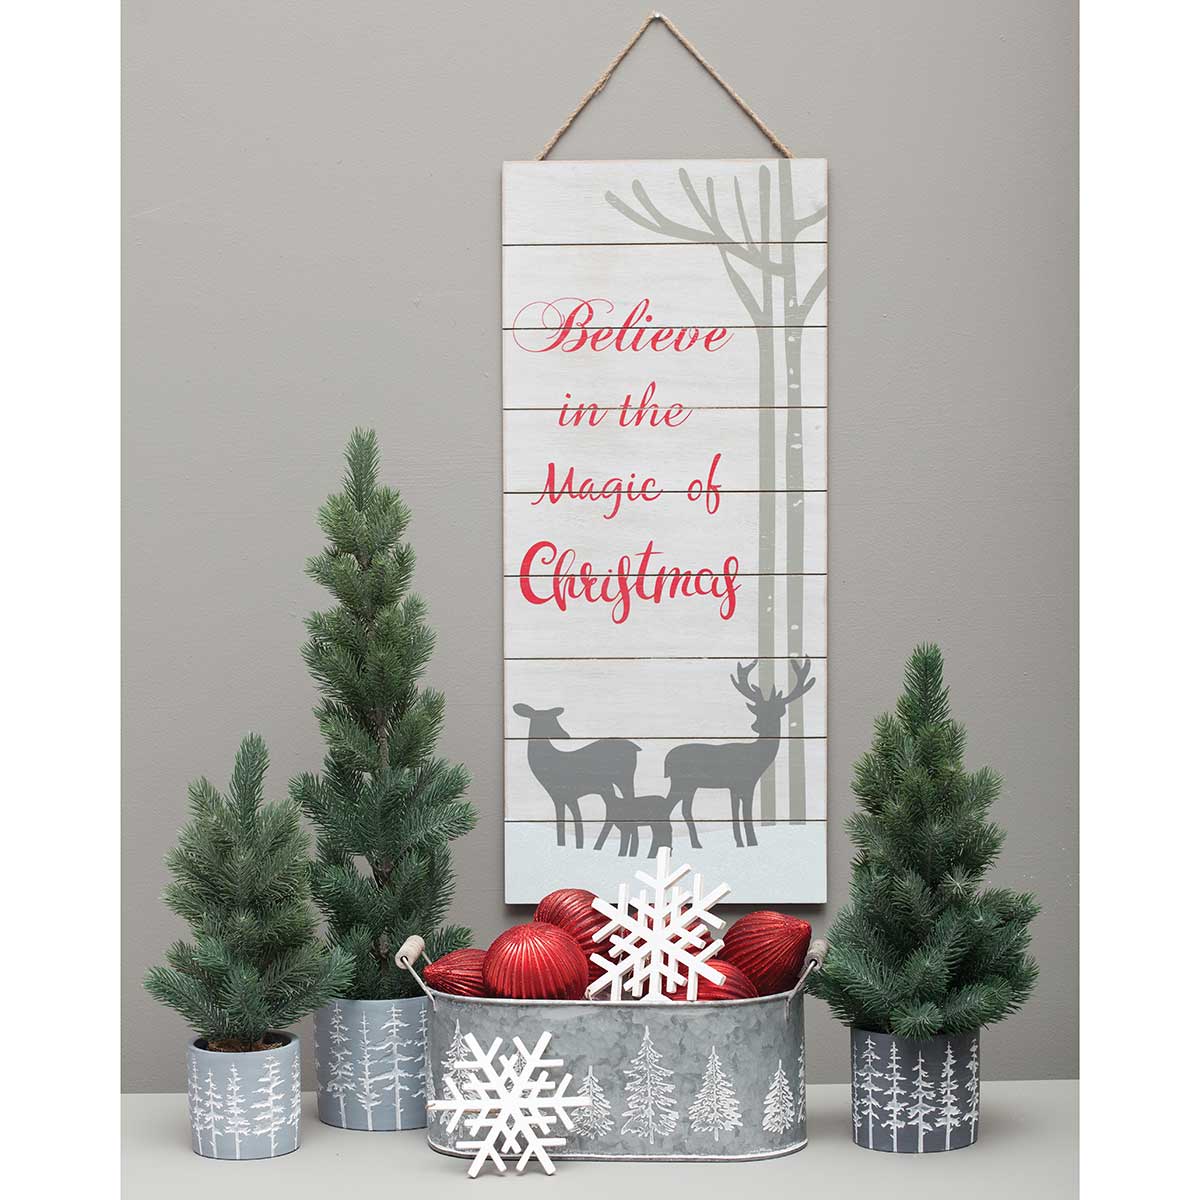 !MAGIC OF CHRISTMAS" GREY/RED WOOD SIGN WITH ROPE HANGER V22